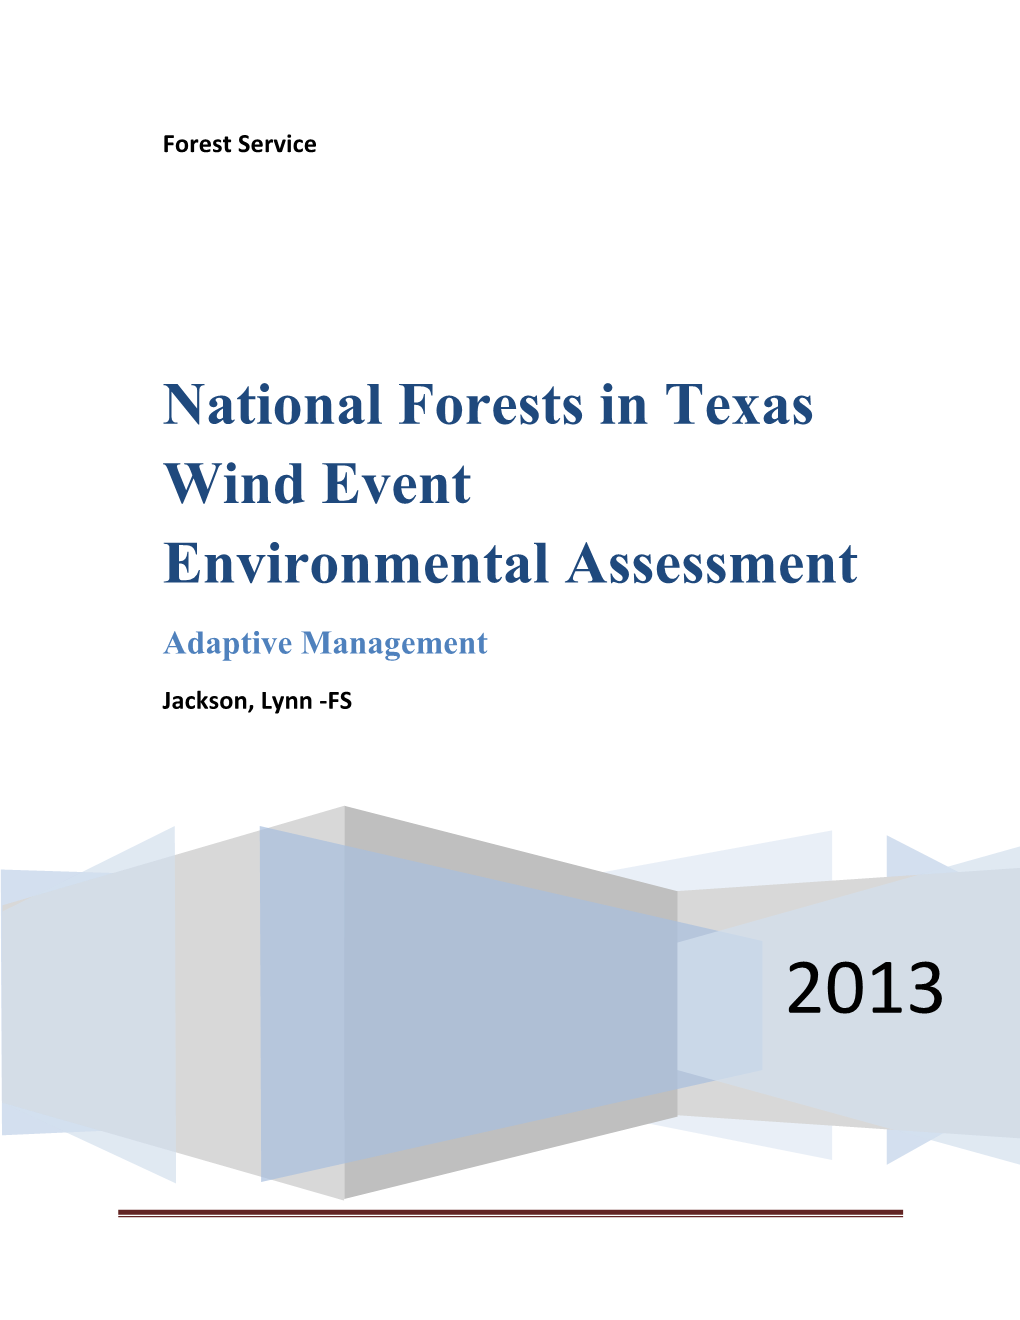 National Forests in Texas Wind Event Environmental Assessment Adaptive Management